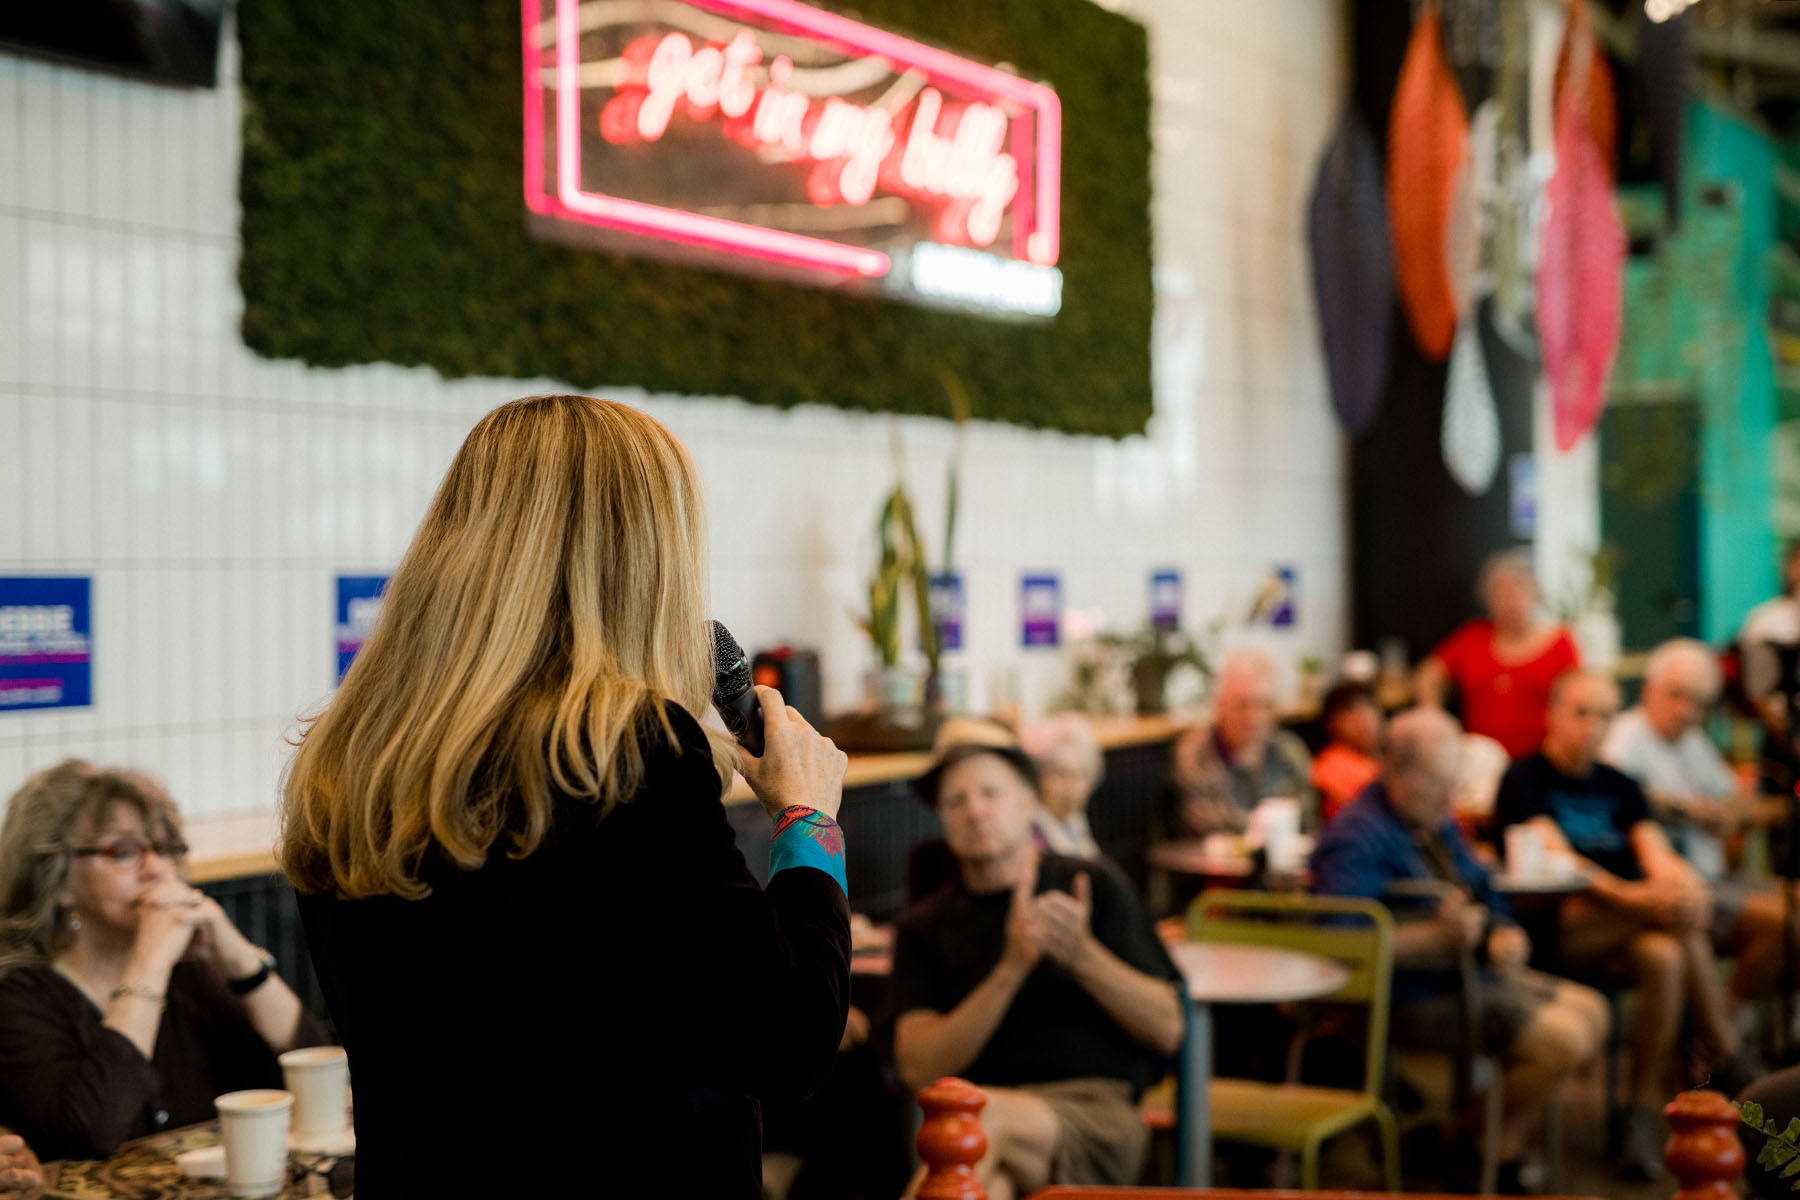 The back of Debbie Mucarsel-Powell's head is seen as she speaks to a crowd in a coffee shop.